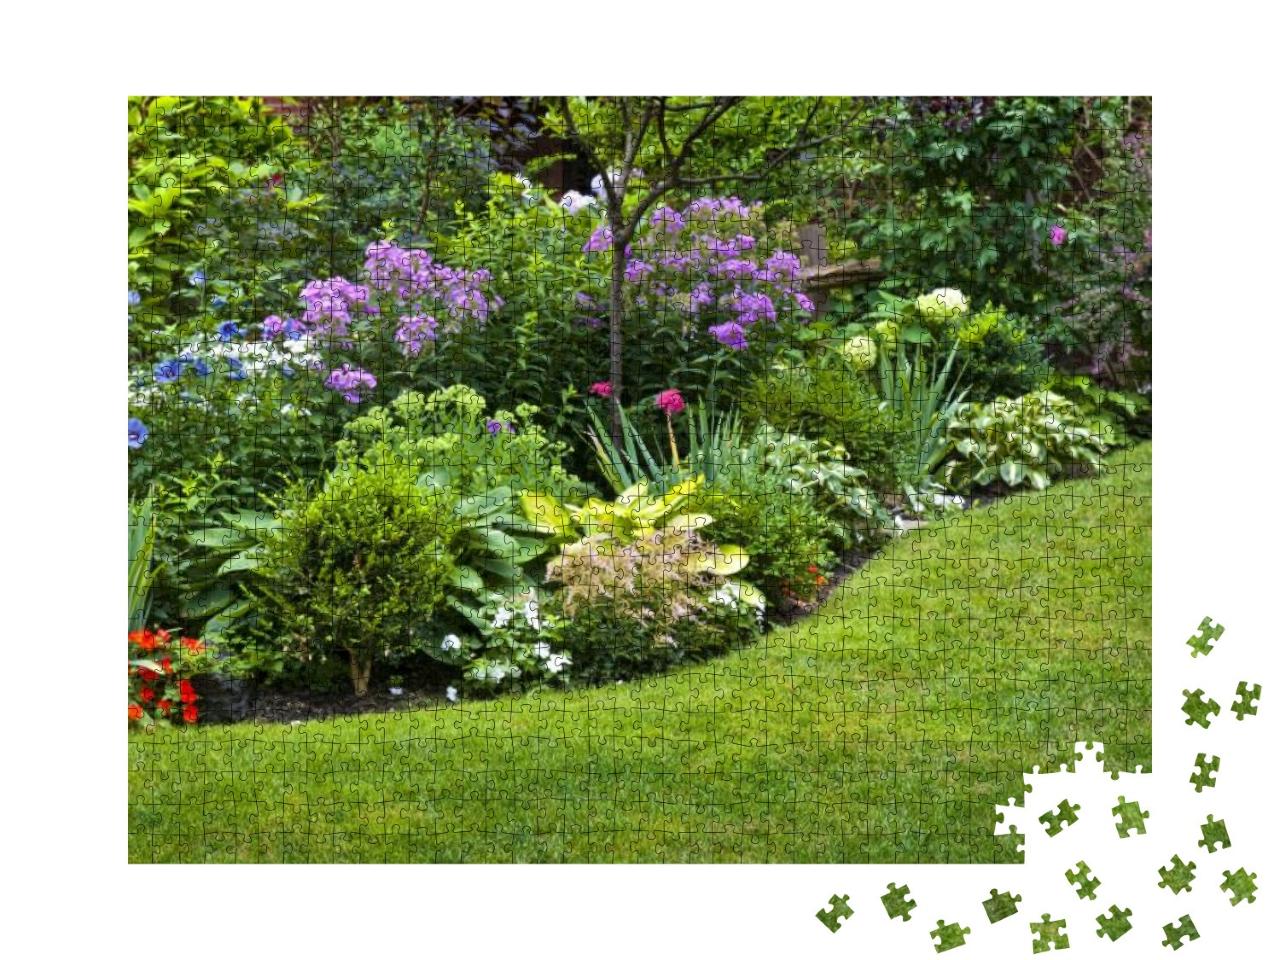 Lush Landscaped Garden with Flowerbed & Colorful Plants... Jigsaw Puzzle with 1000 pieces